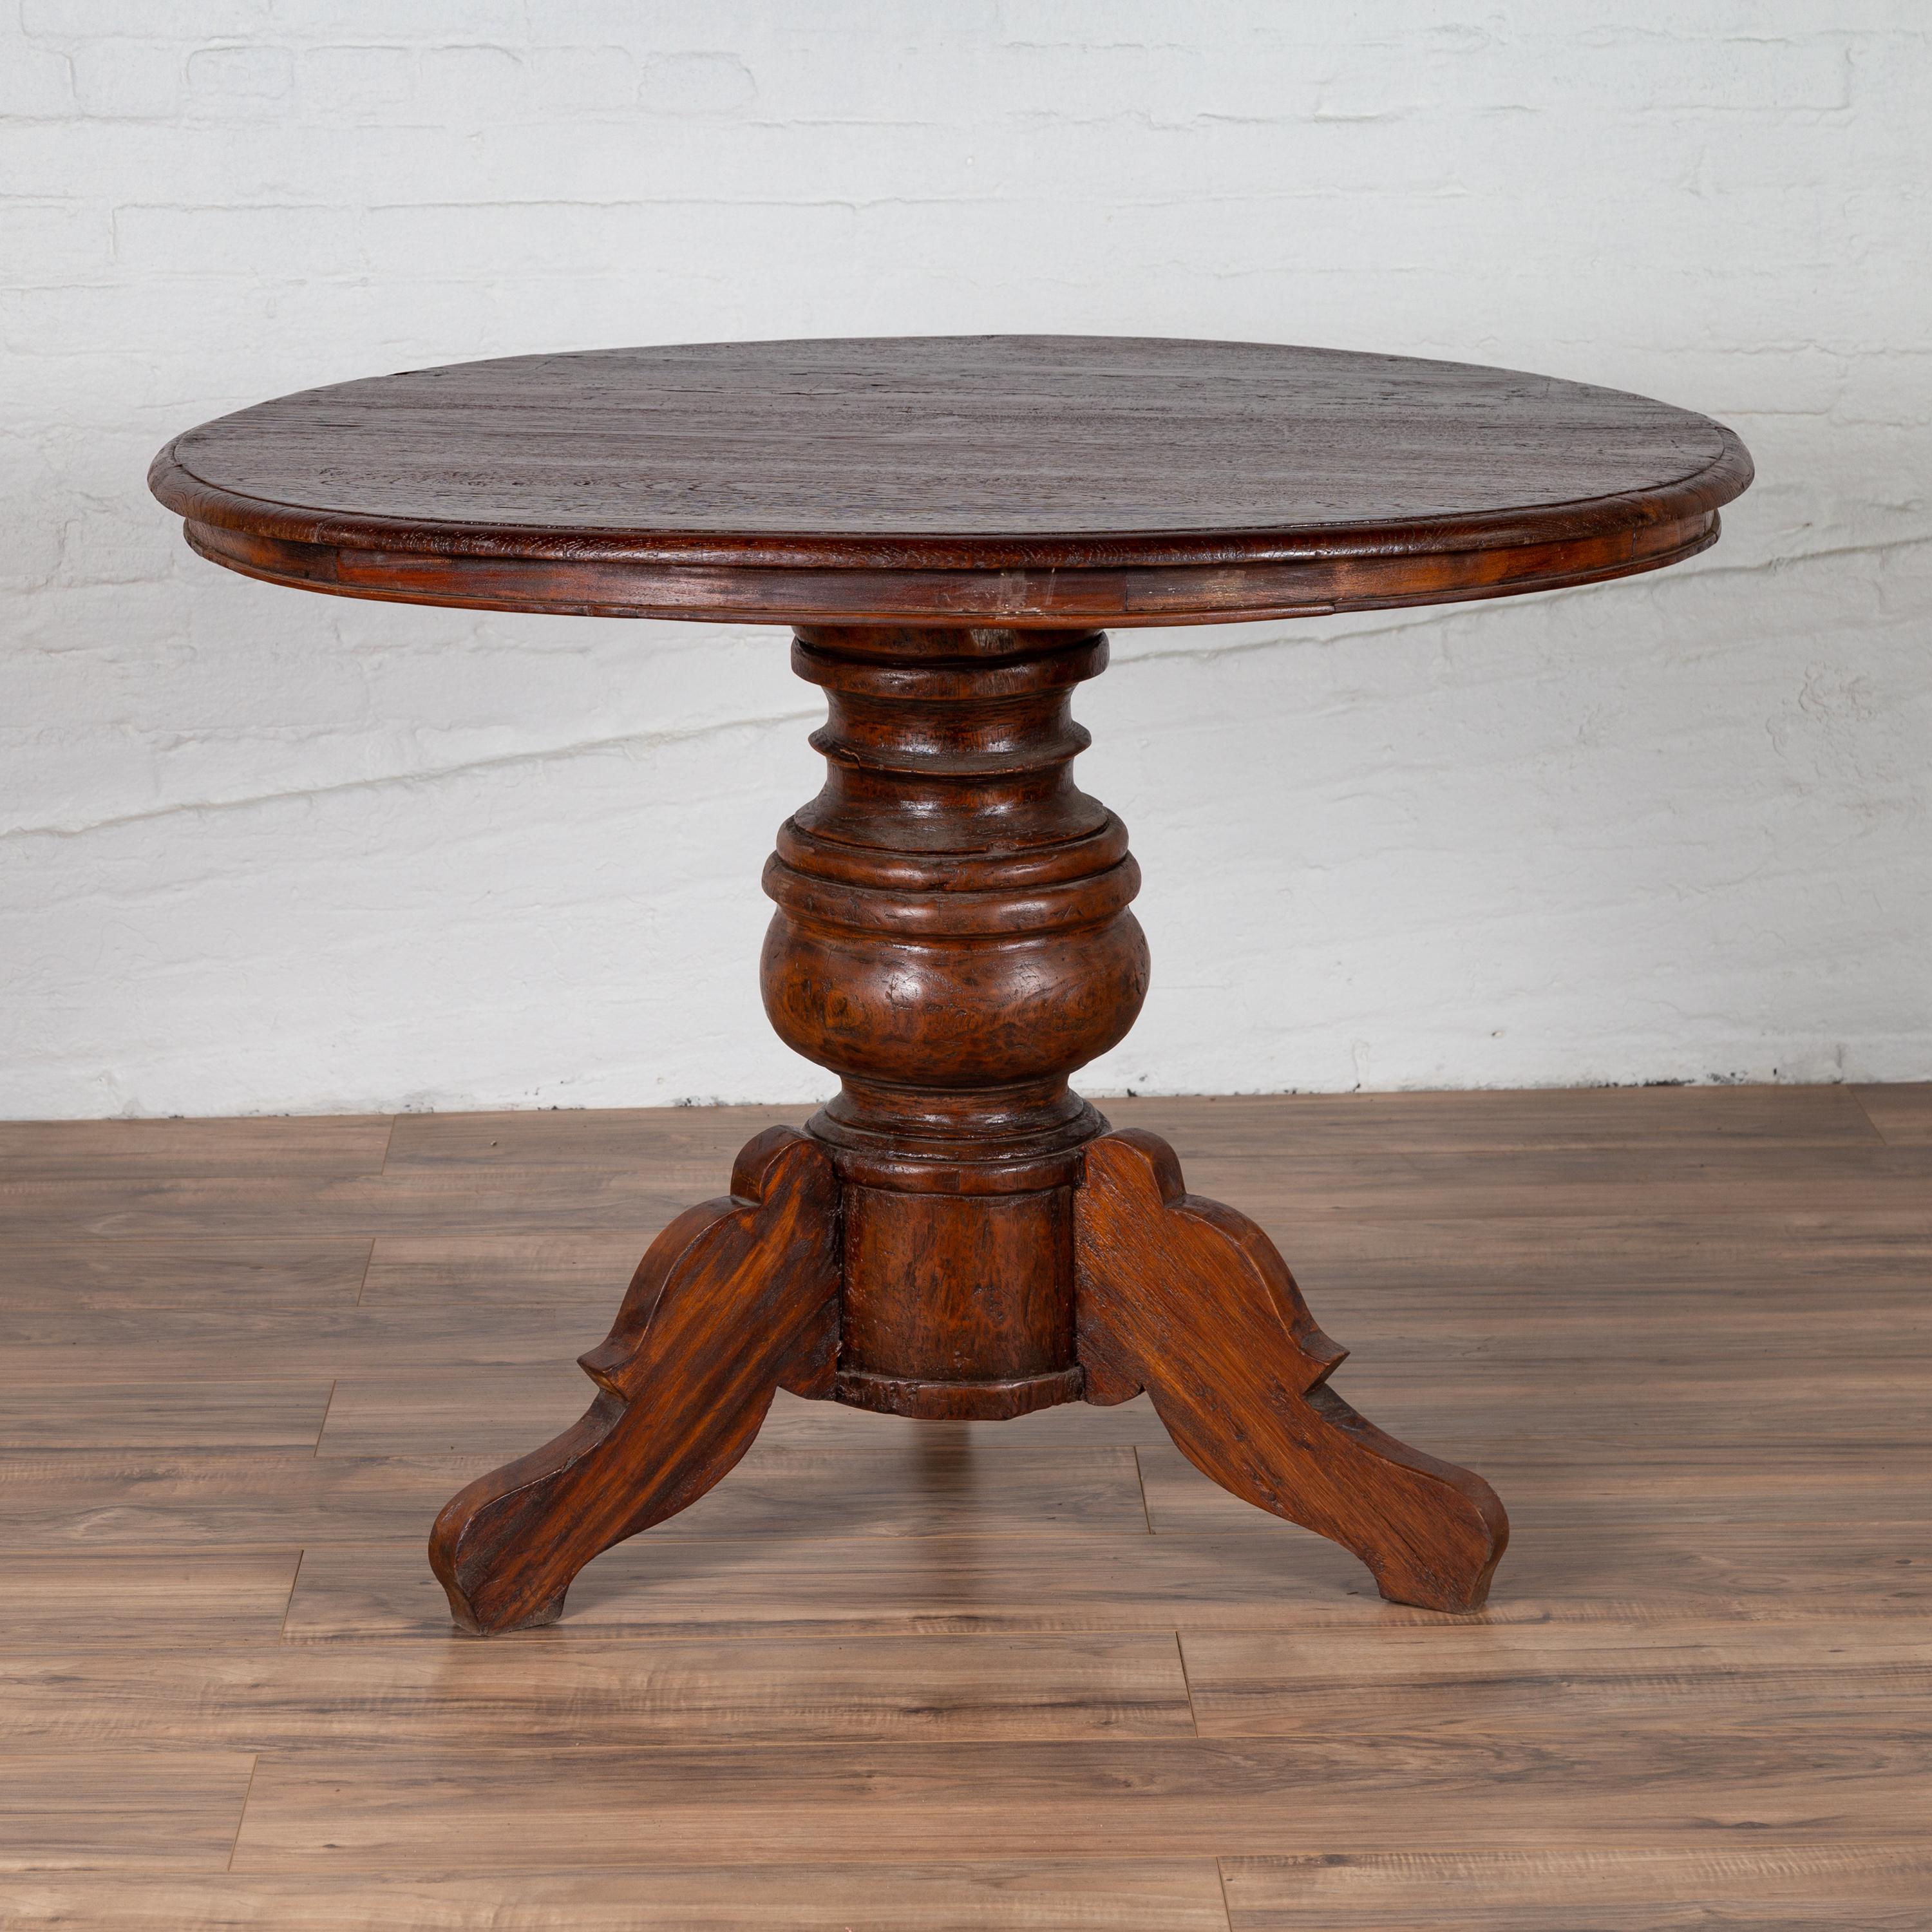 Indonesian Dutch Colonial Javanese Pedestal Tripod Table with Circular Top and Turned Base